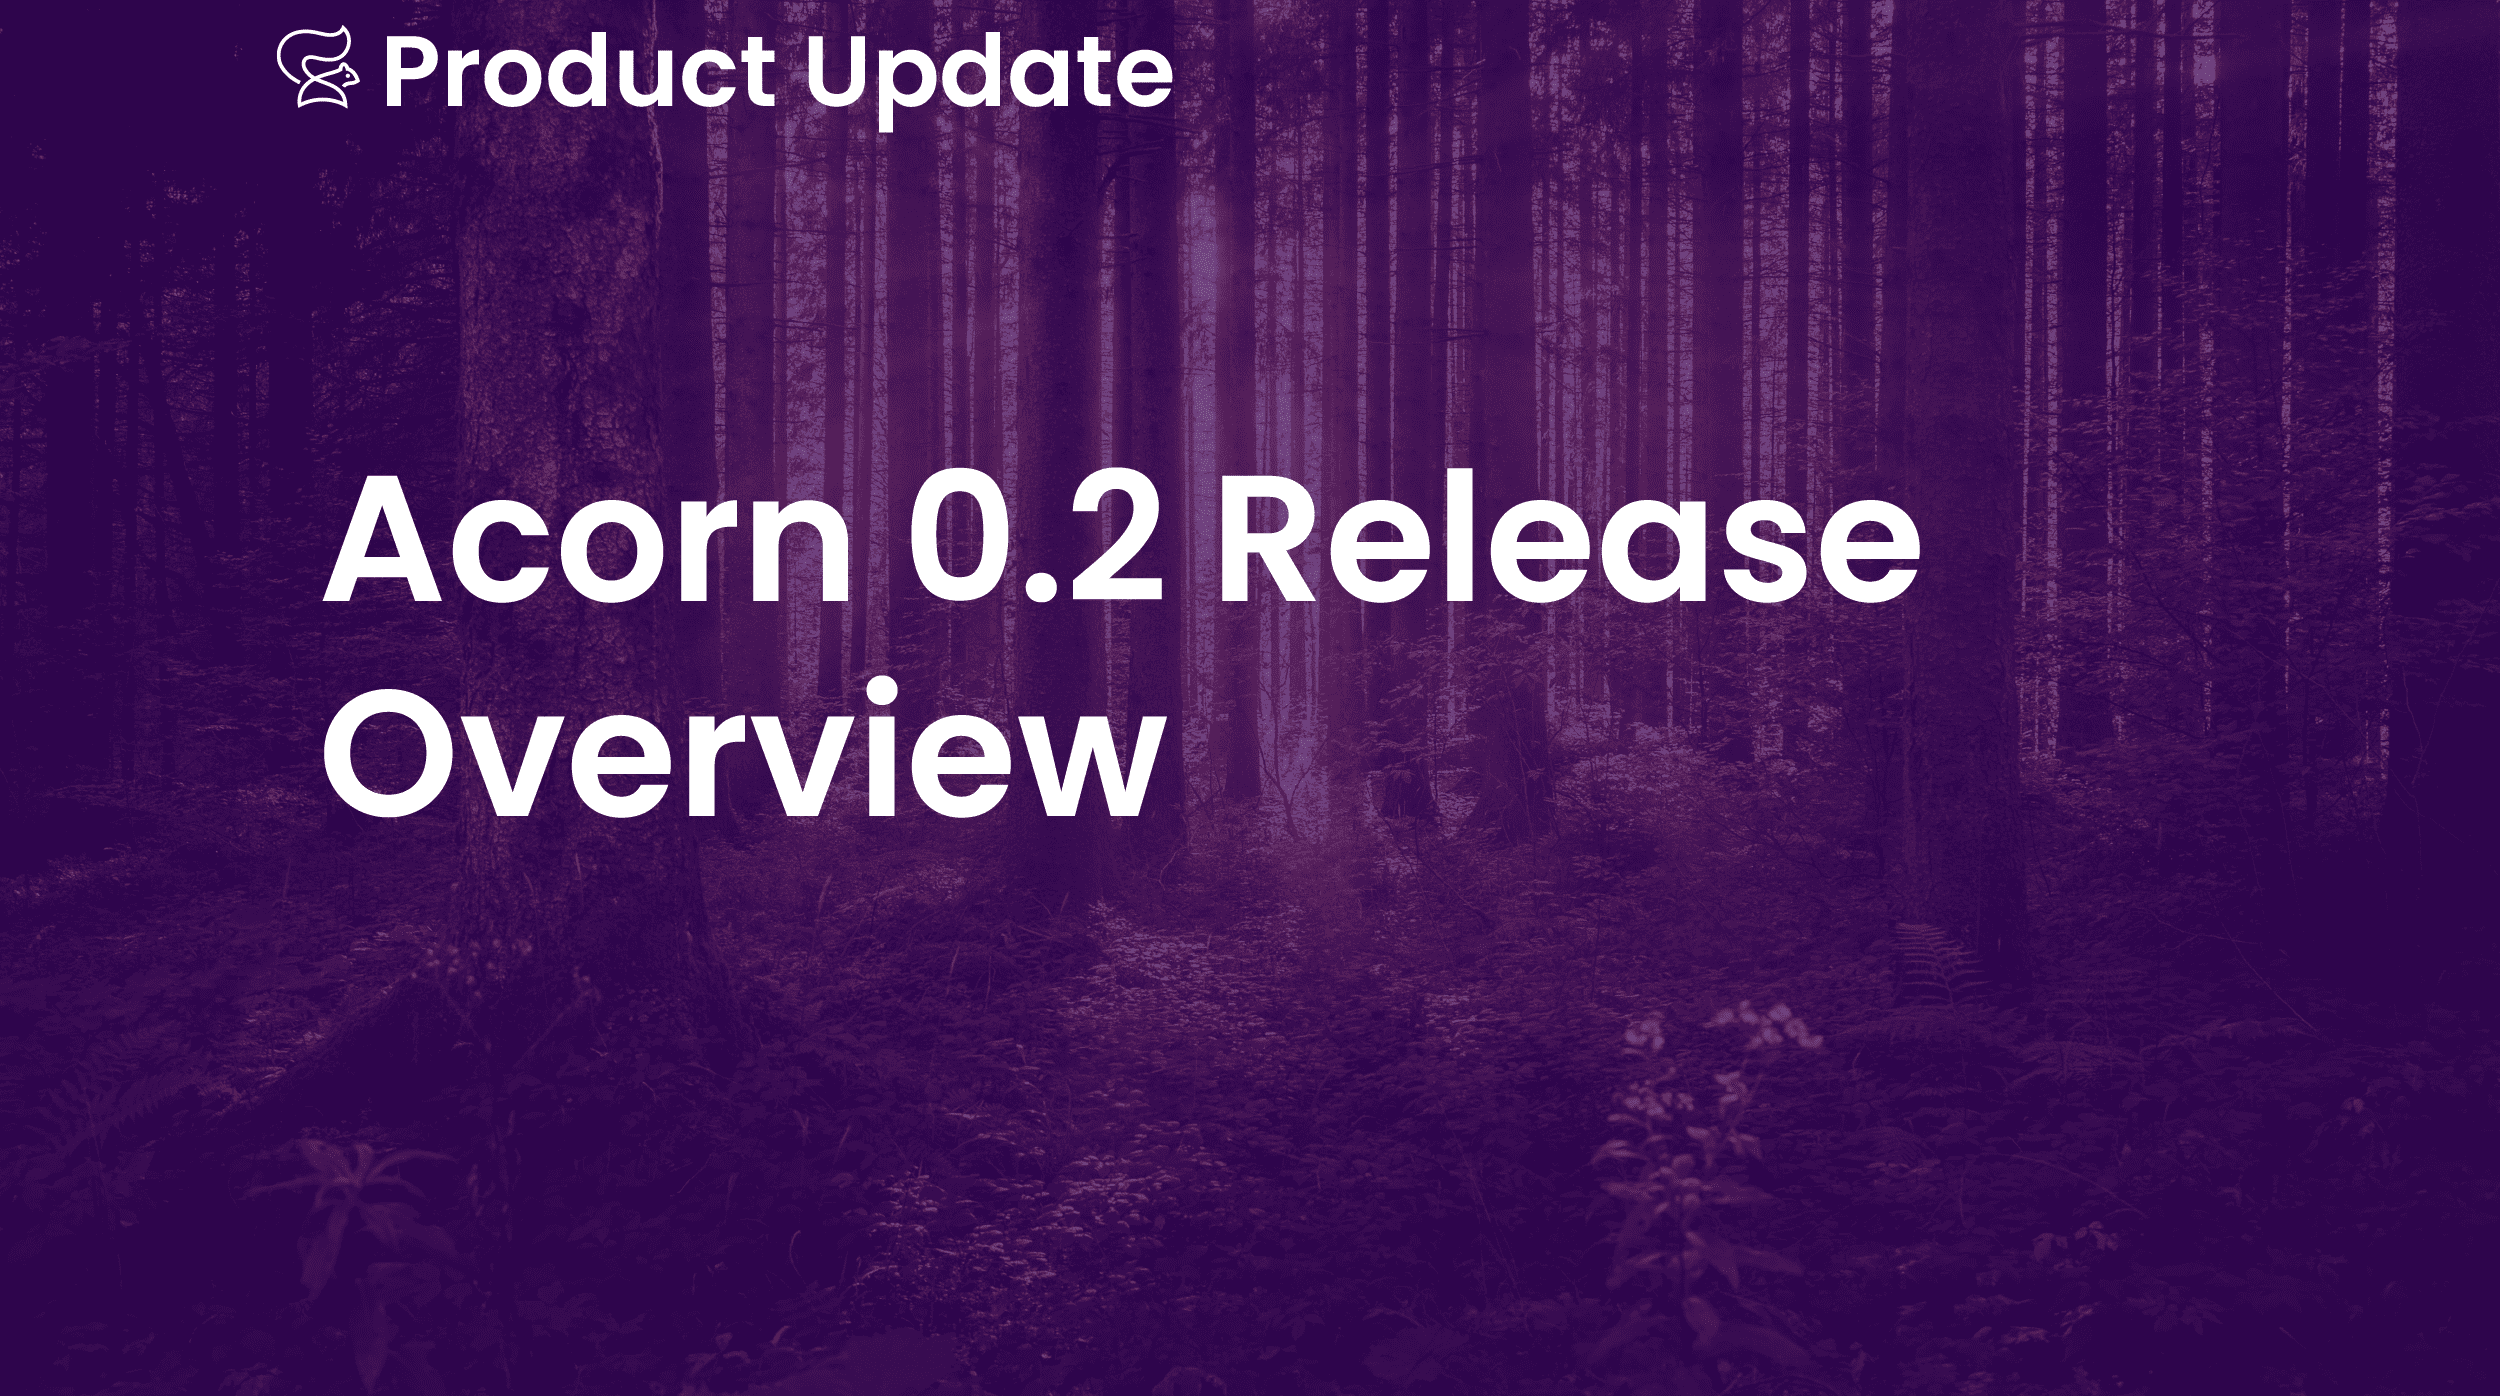 What’s new in v0.2.0